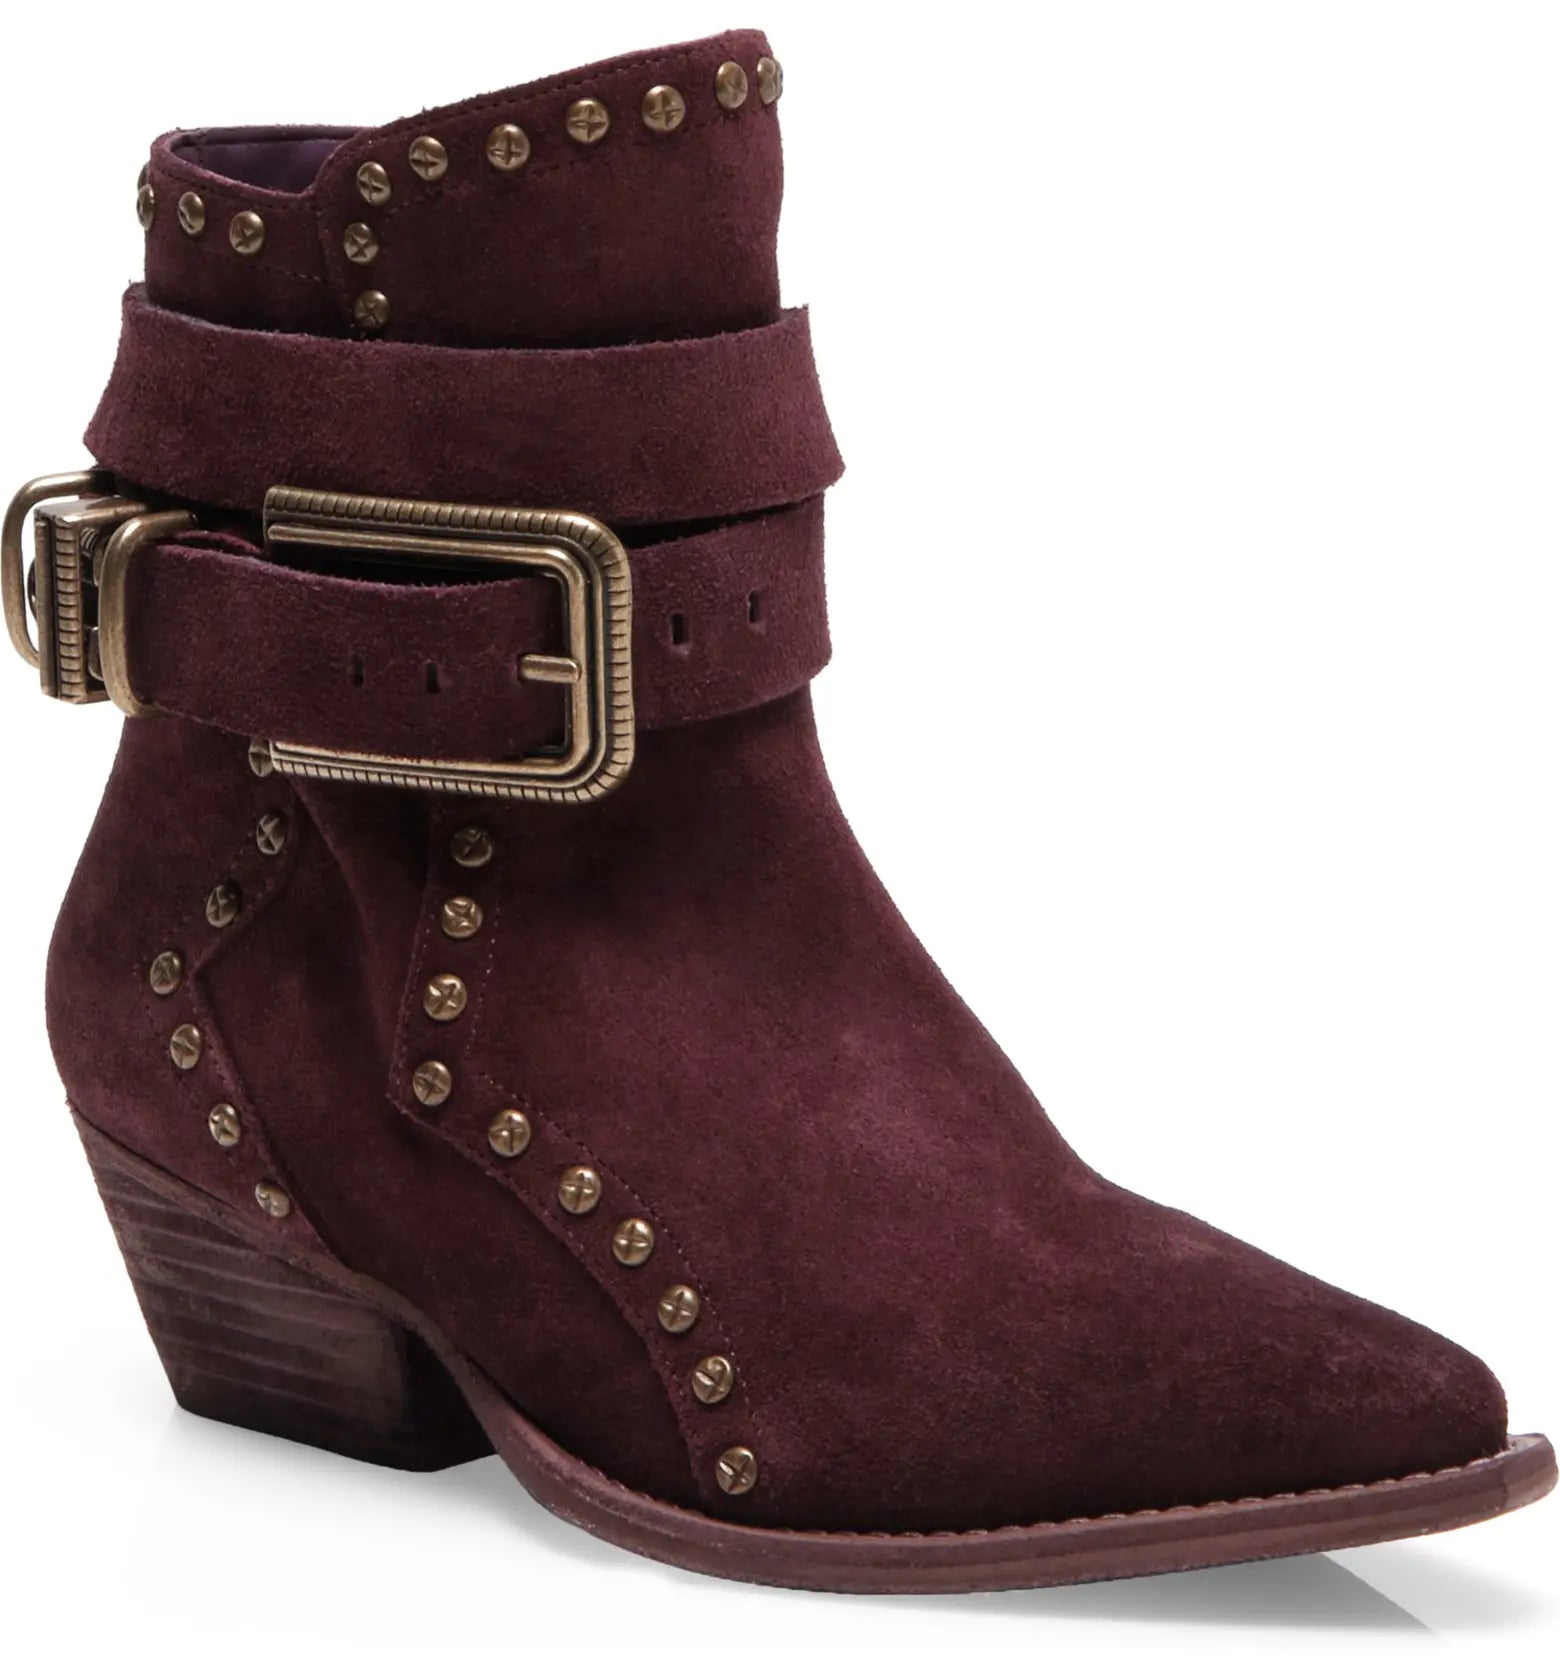 FREE PEOPLE BILLY BOOT